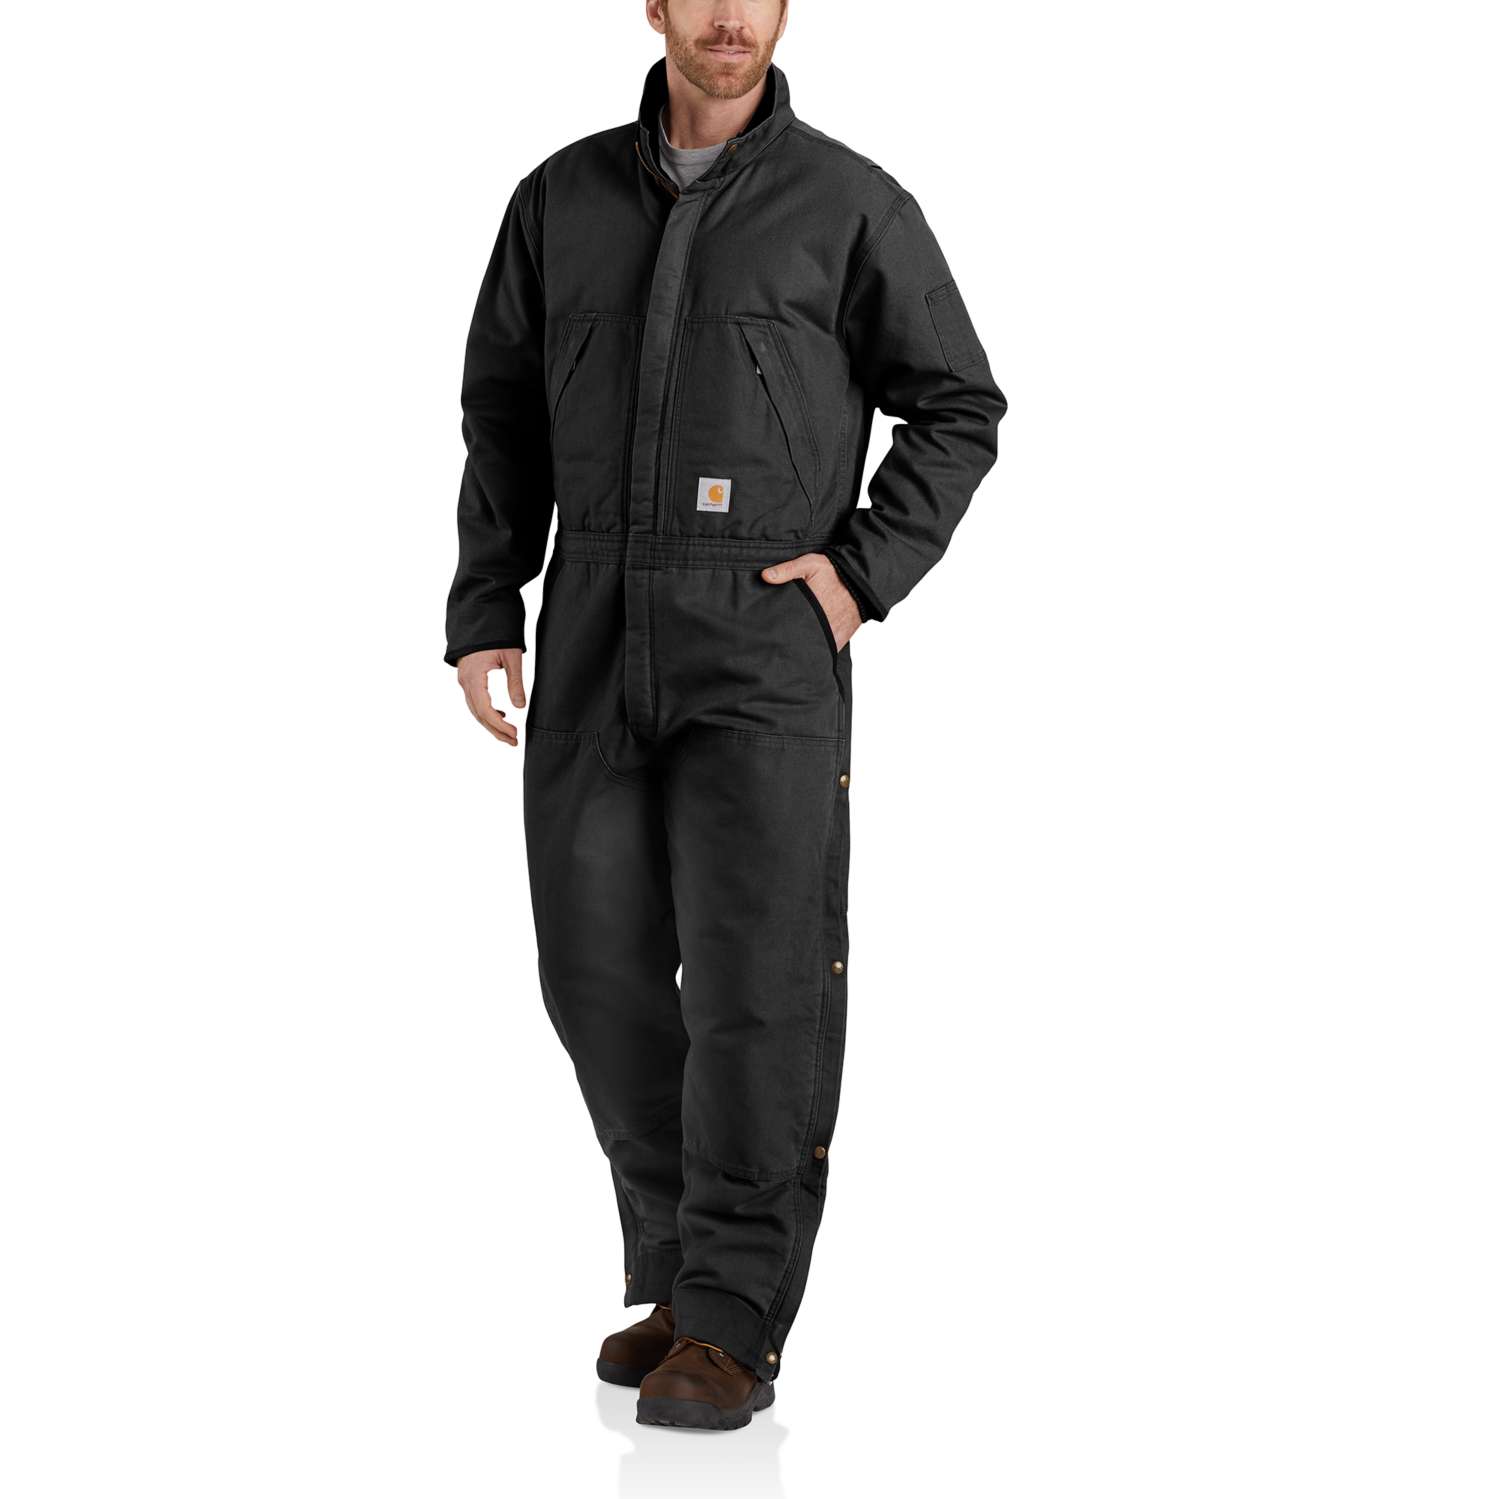 WASHED_DUCK_INSULATED_COVERALL_IUTz5AZ4cQ